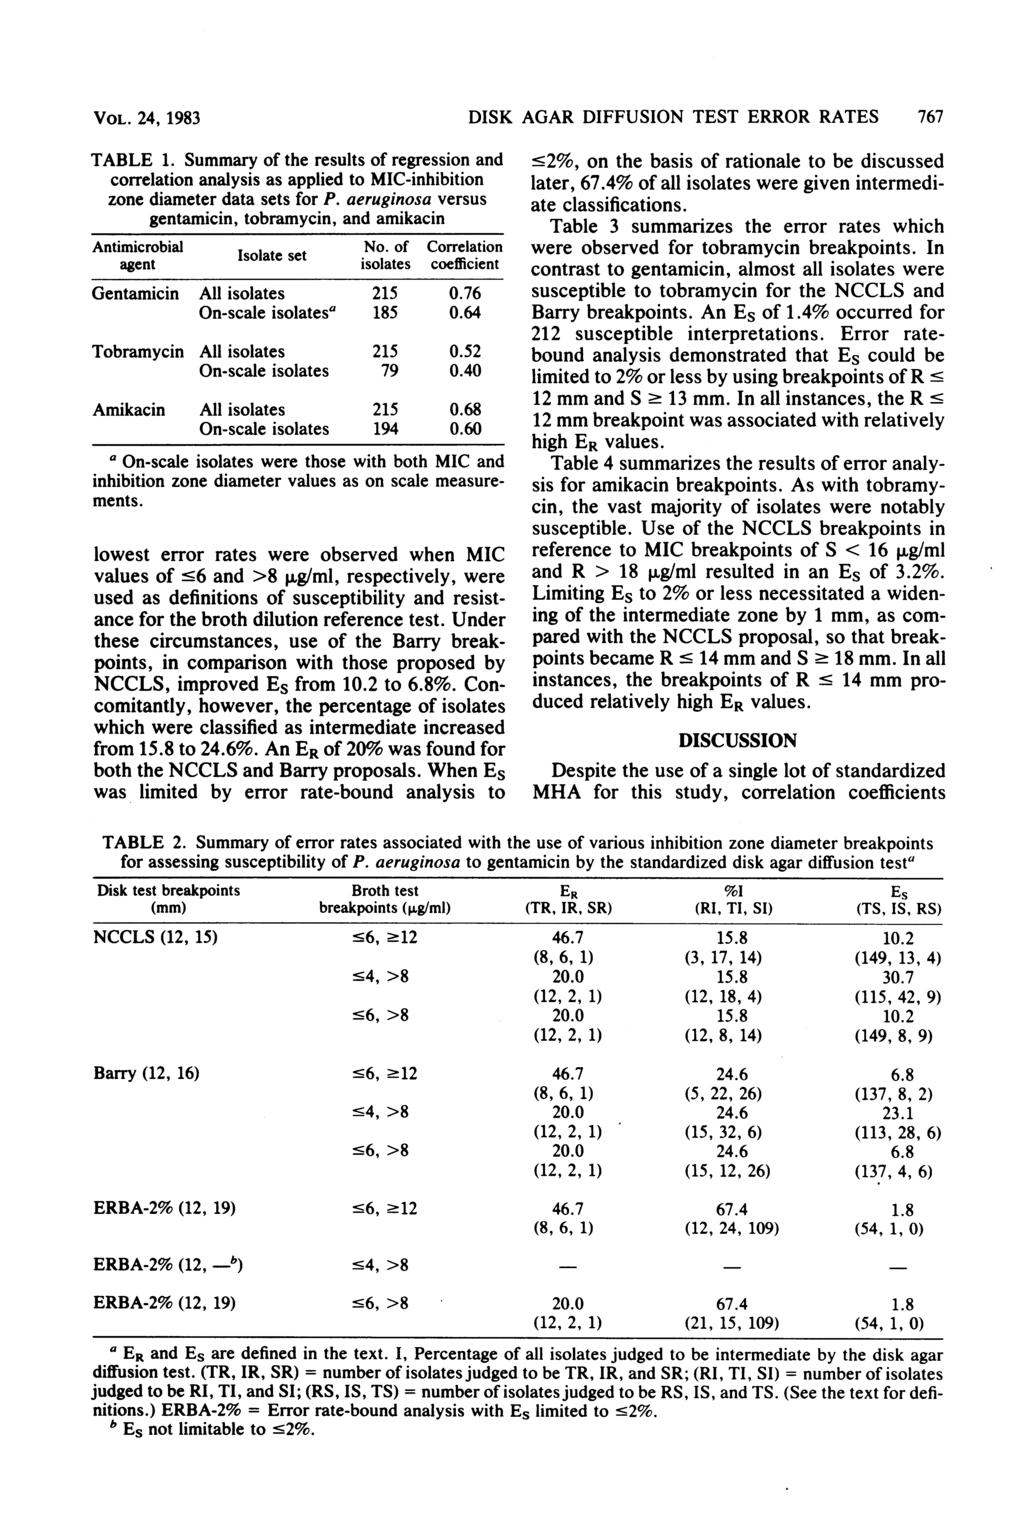 VOL. 24, 1983 TABLE 1. Summary of the results of regression and correlation analysis as applied to MIC-inhibition zone diameter data sets for P.